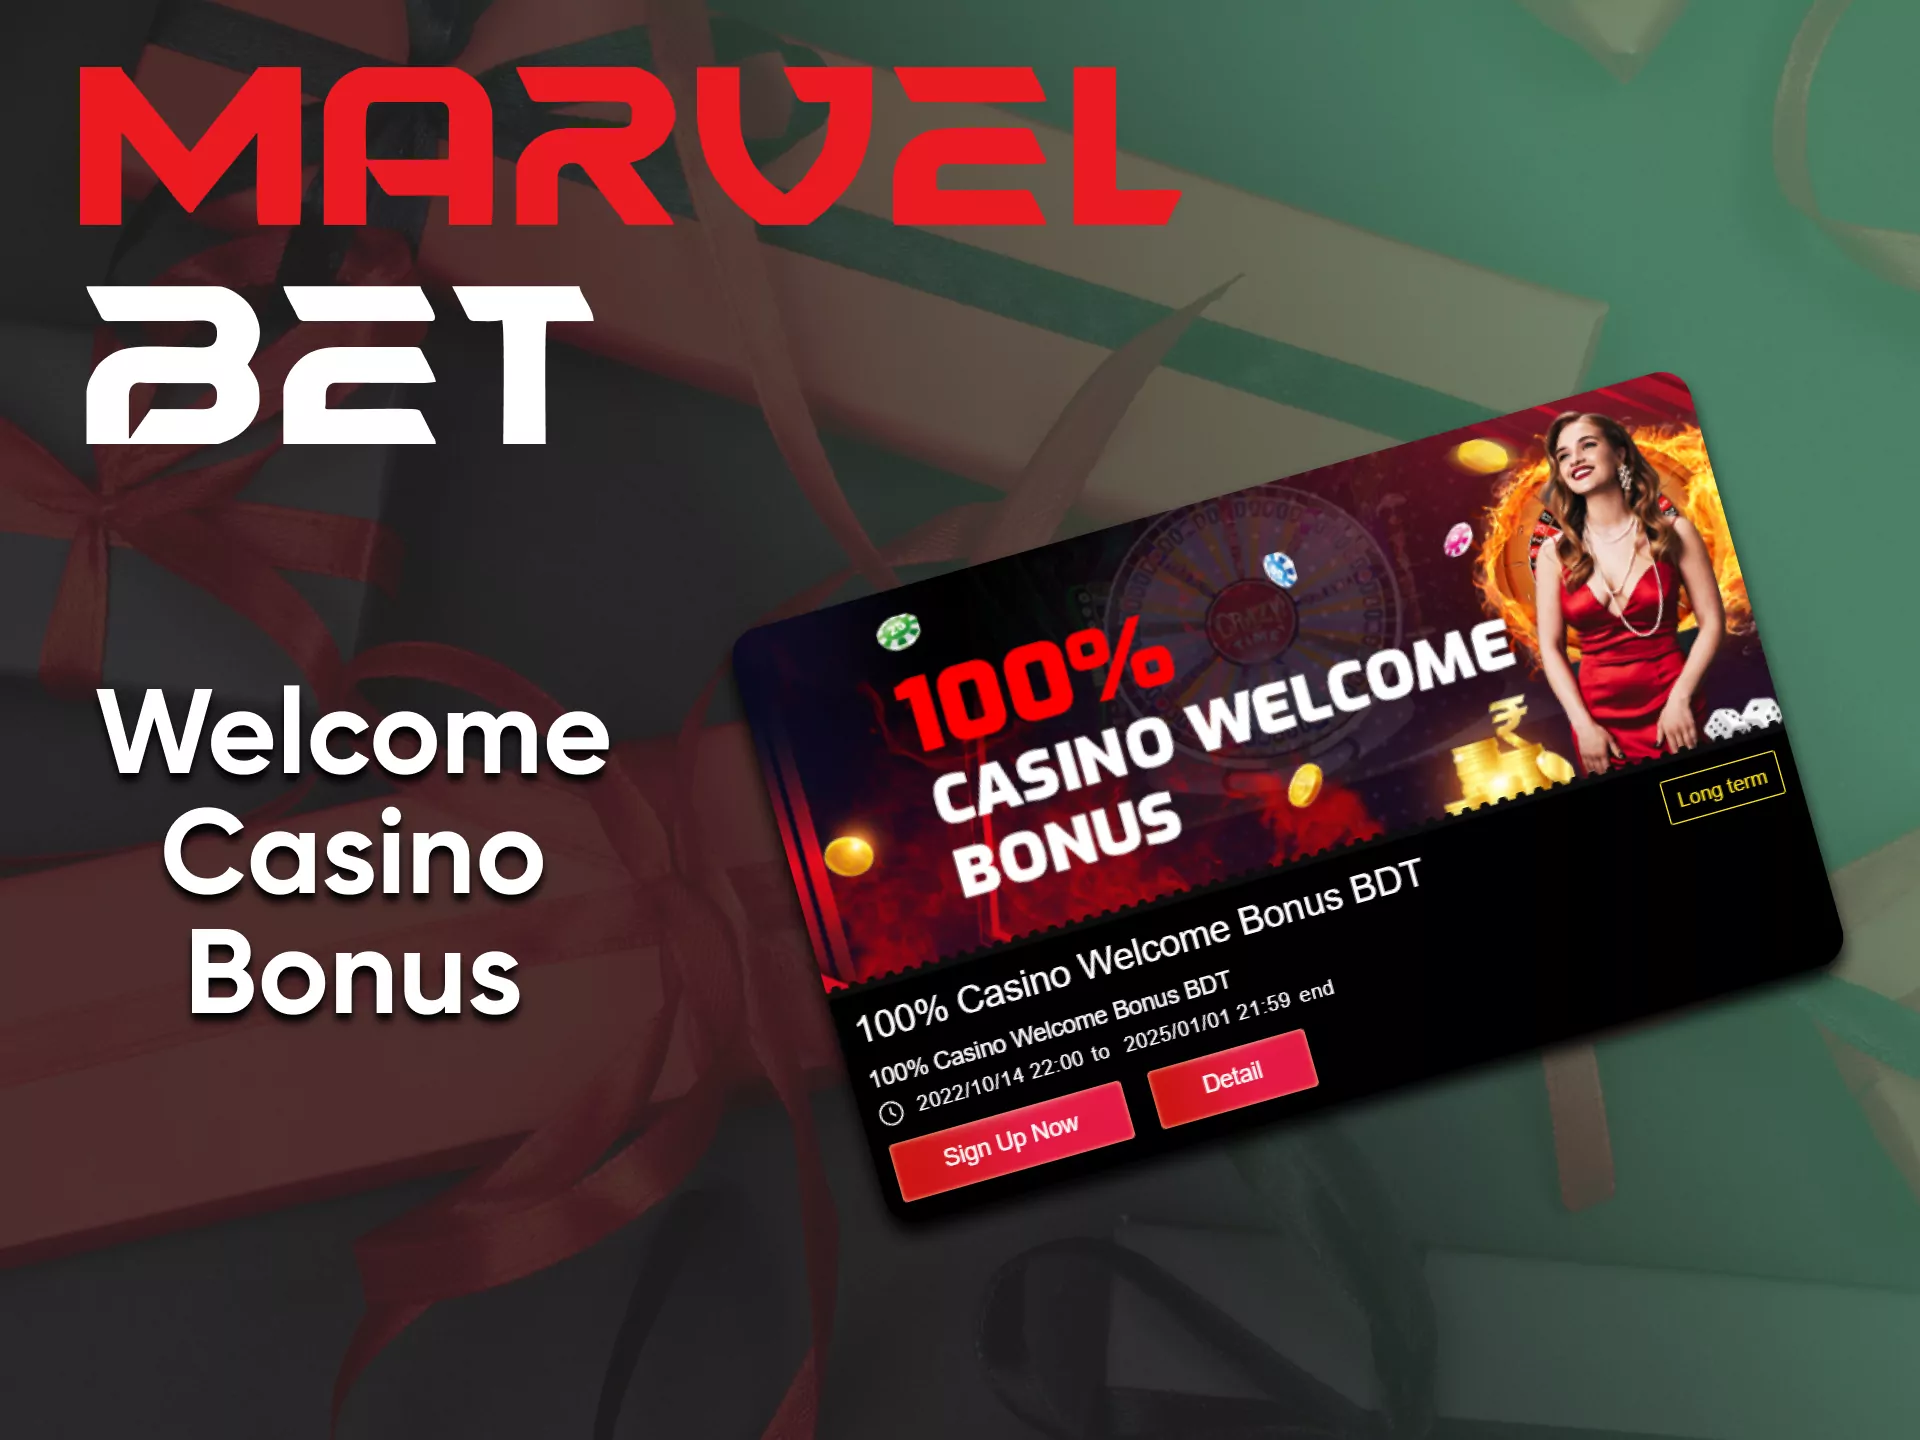 Fund your account and get a bonus from Marvelbet.